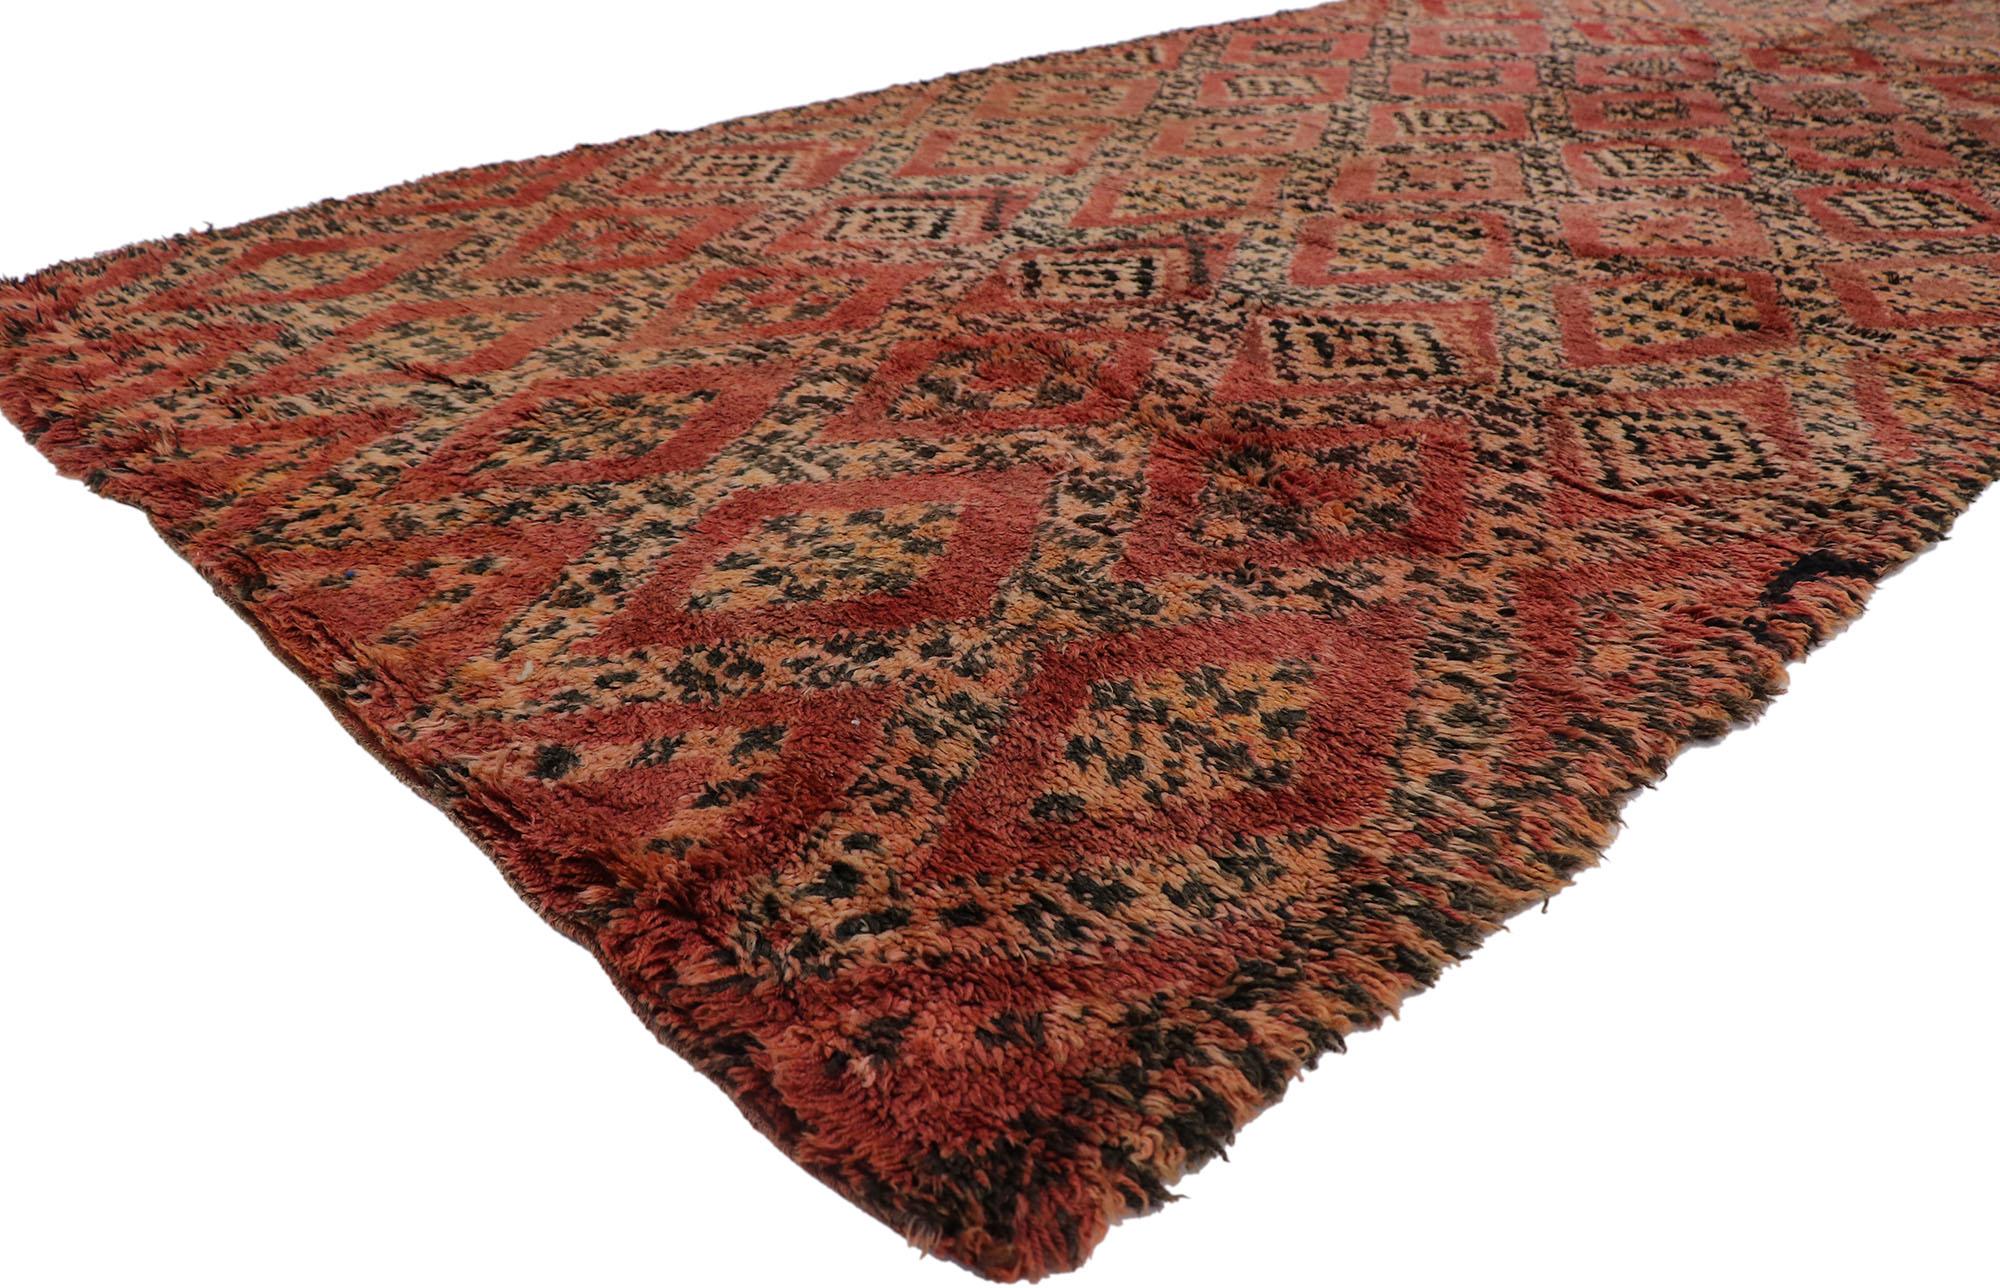 21263 Vintage Moroccan Beni Ourain Rug, 05'10 x 12'03.
Warm worldy charm meets modern desert in this hand-knotted wool vintage Moroccan Beni Ourain rug. The visual complexity and spicy earth-tones woven into this piece work together creating a